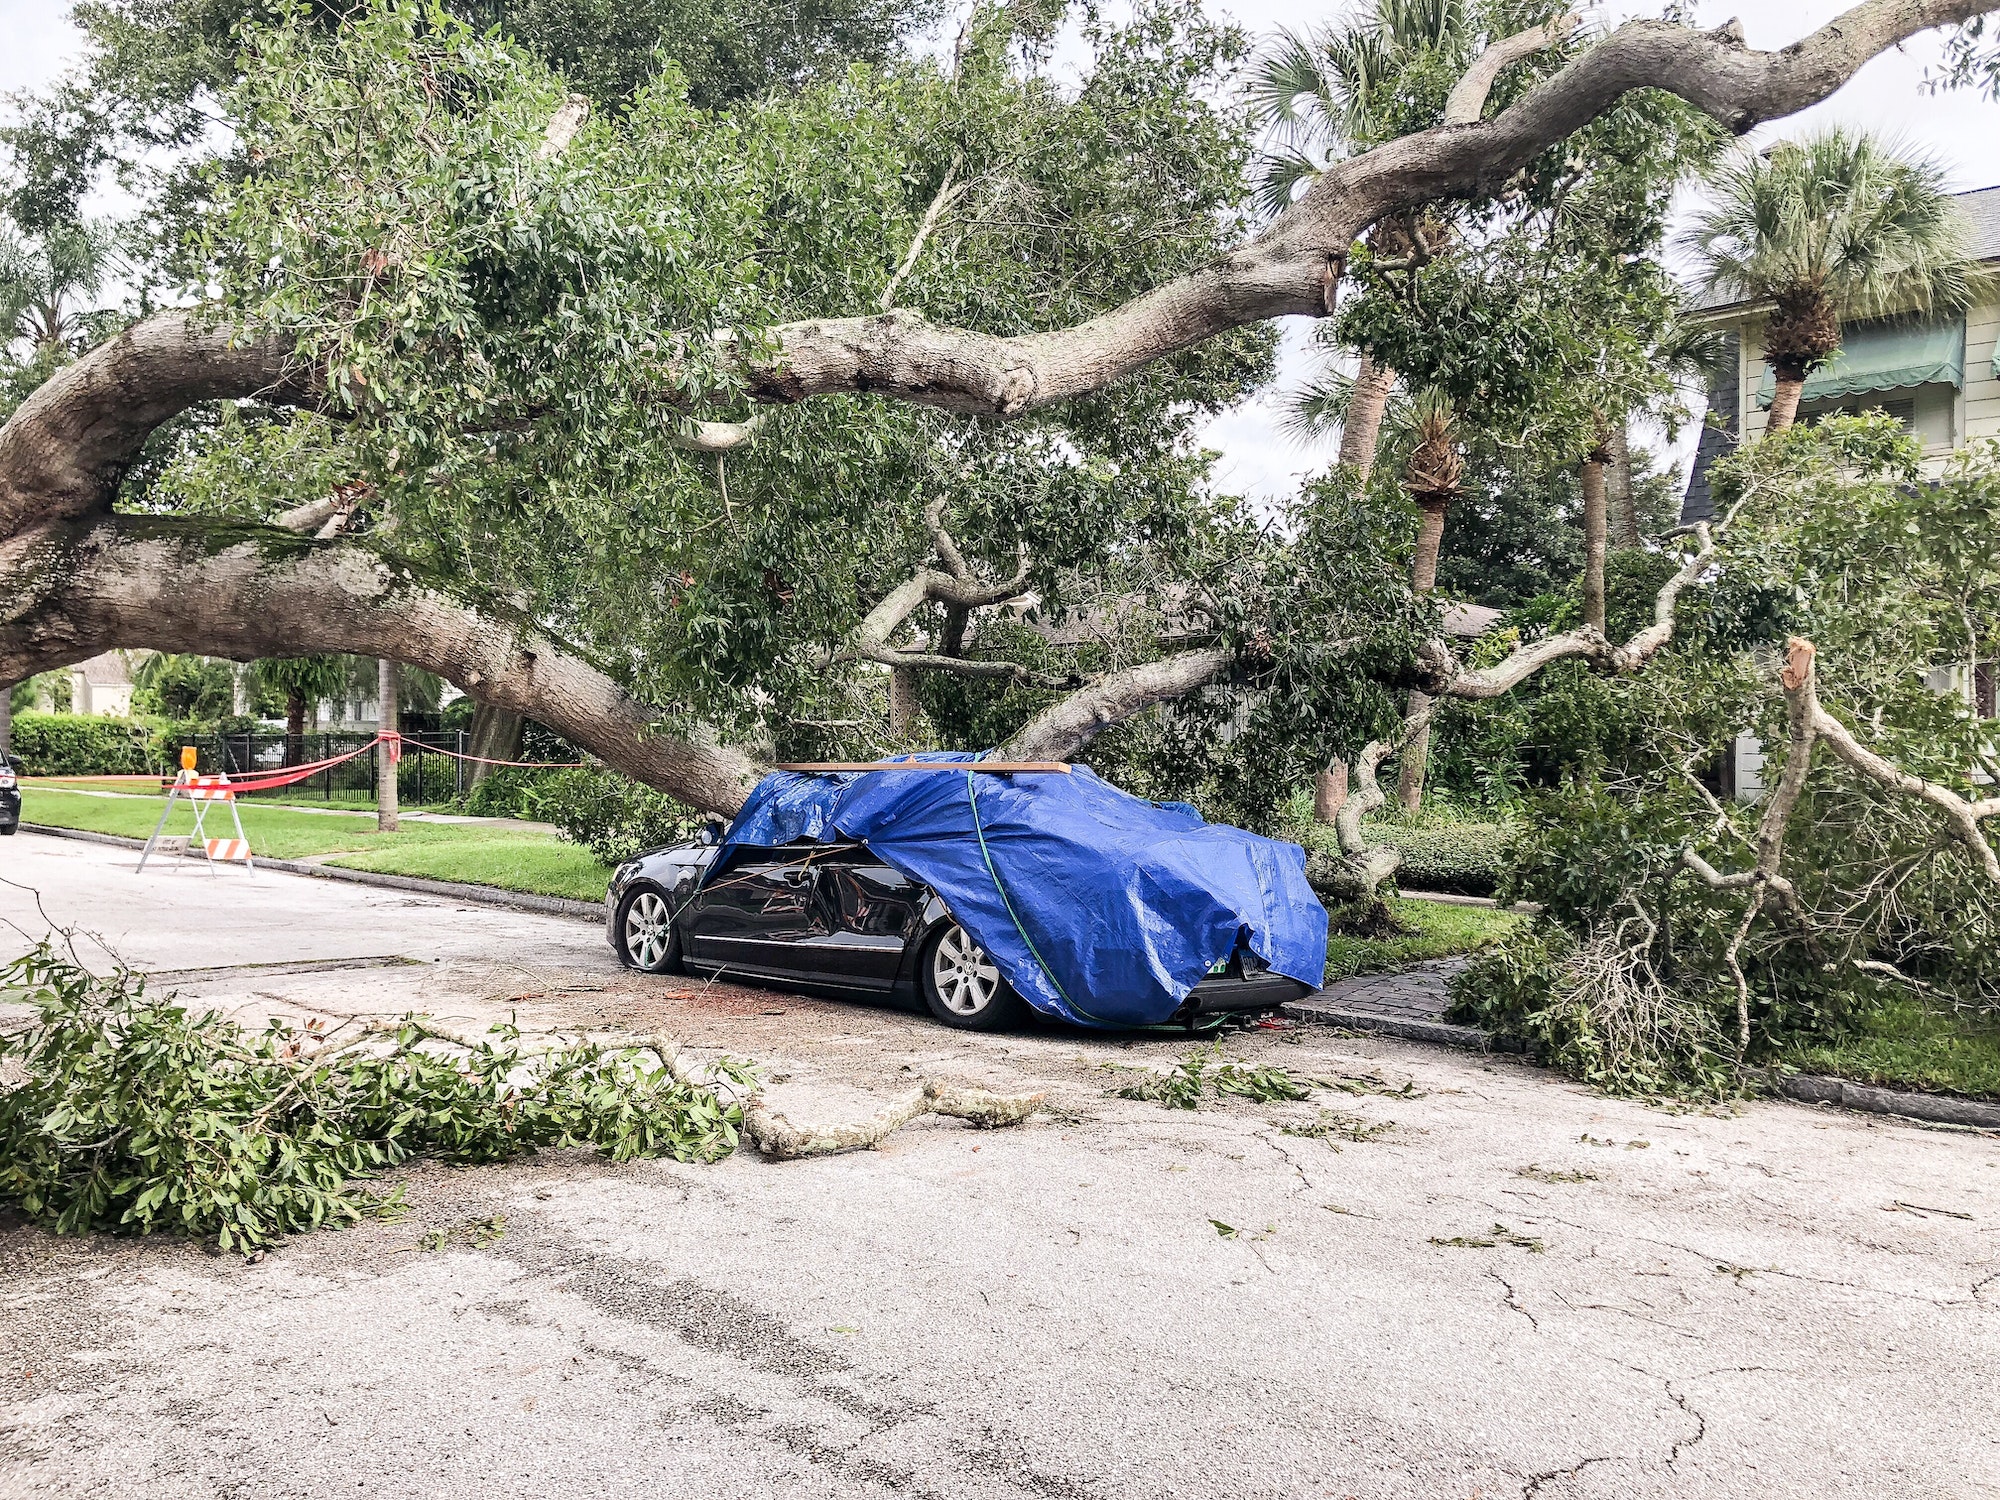 The aftermath of a hurricane with a fallen tree that landed on a car